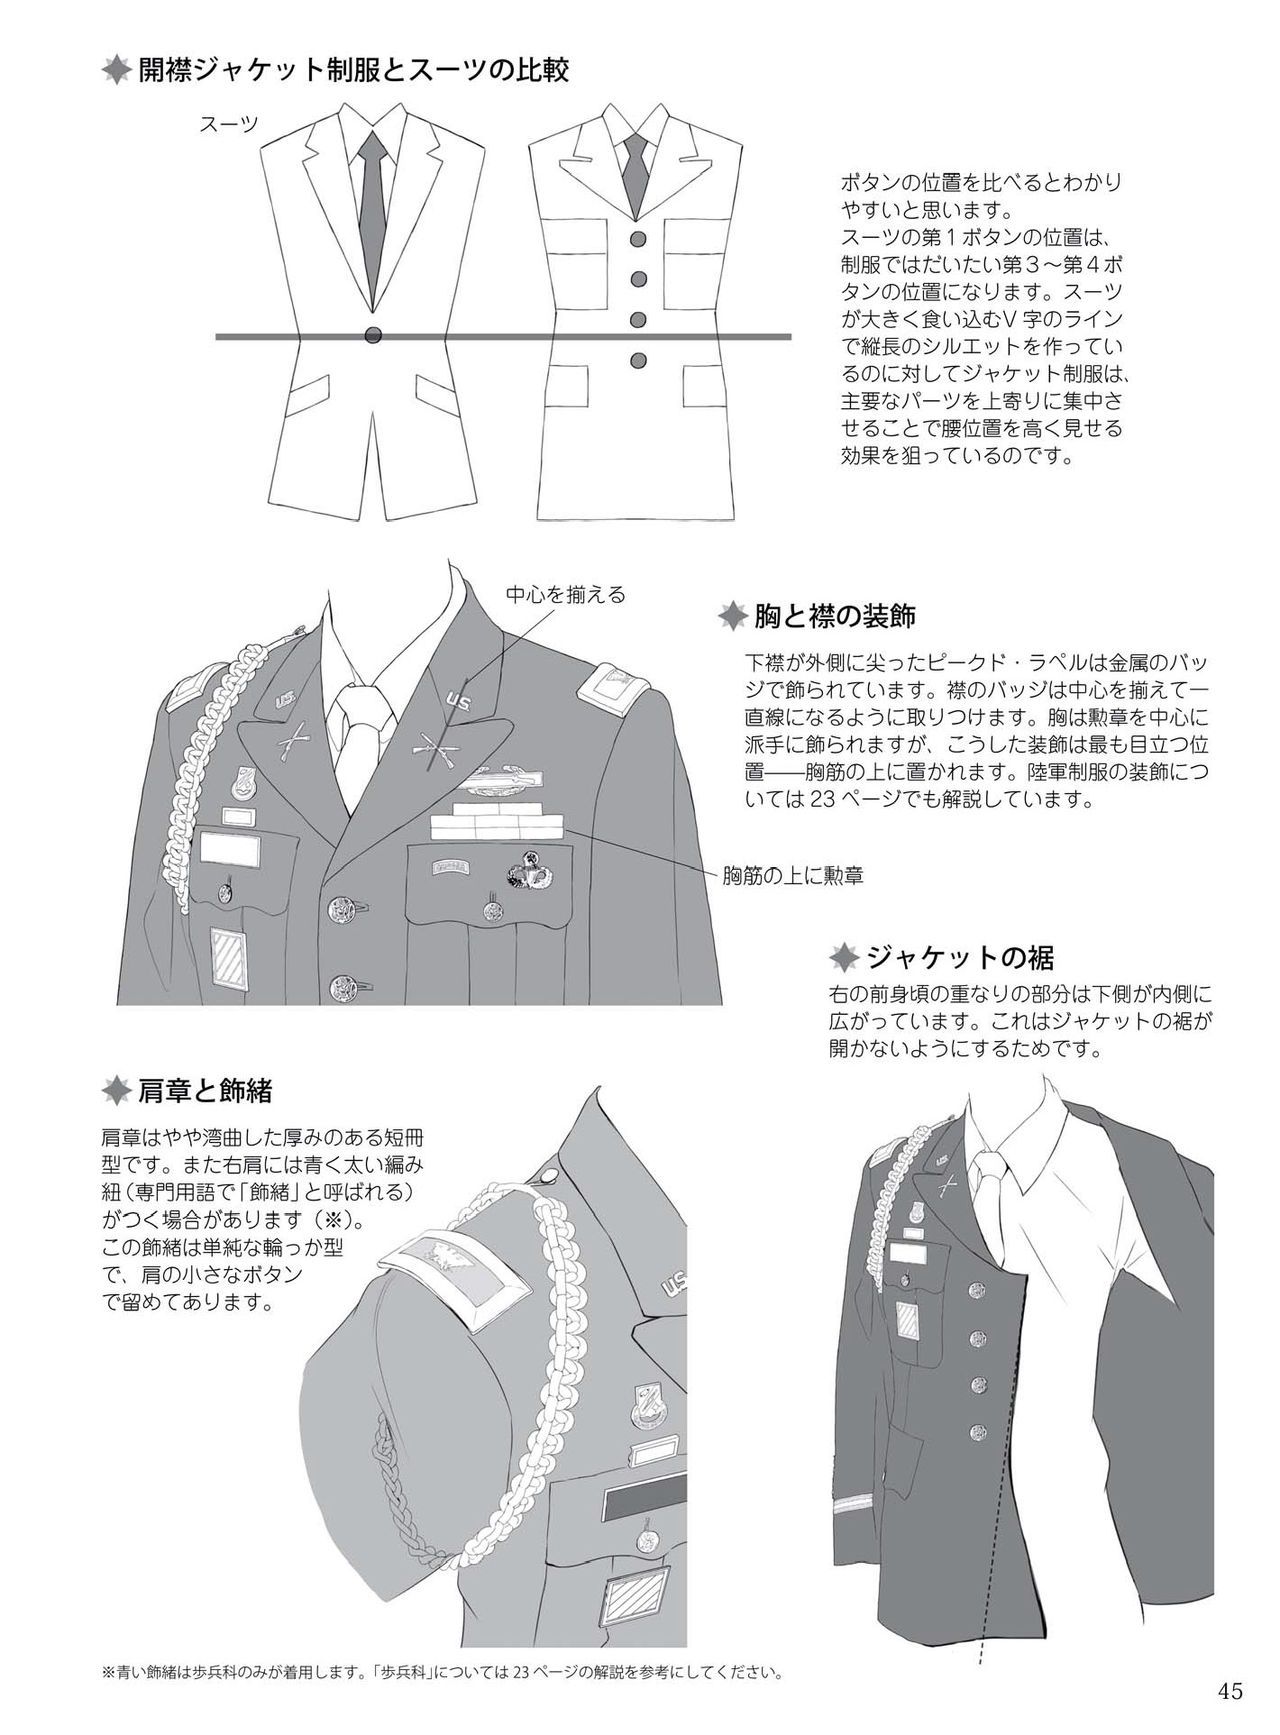 How to draw military uniforms and uniforms From Self-Defense Forces 軍服・制服の描き方 アメリカ軍・自衛隊の制服から戦闘服まで 48